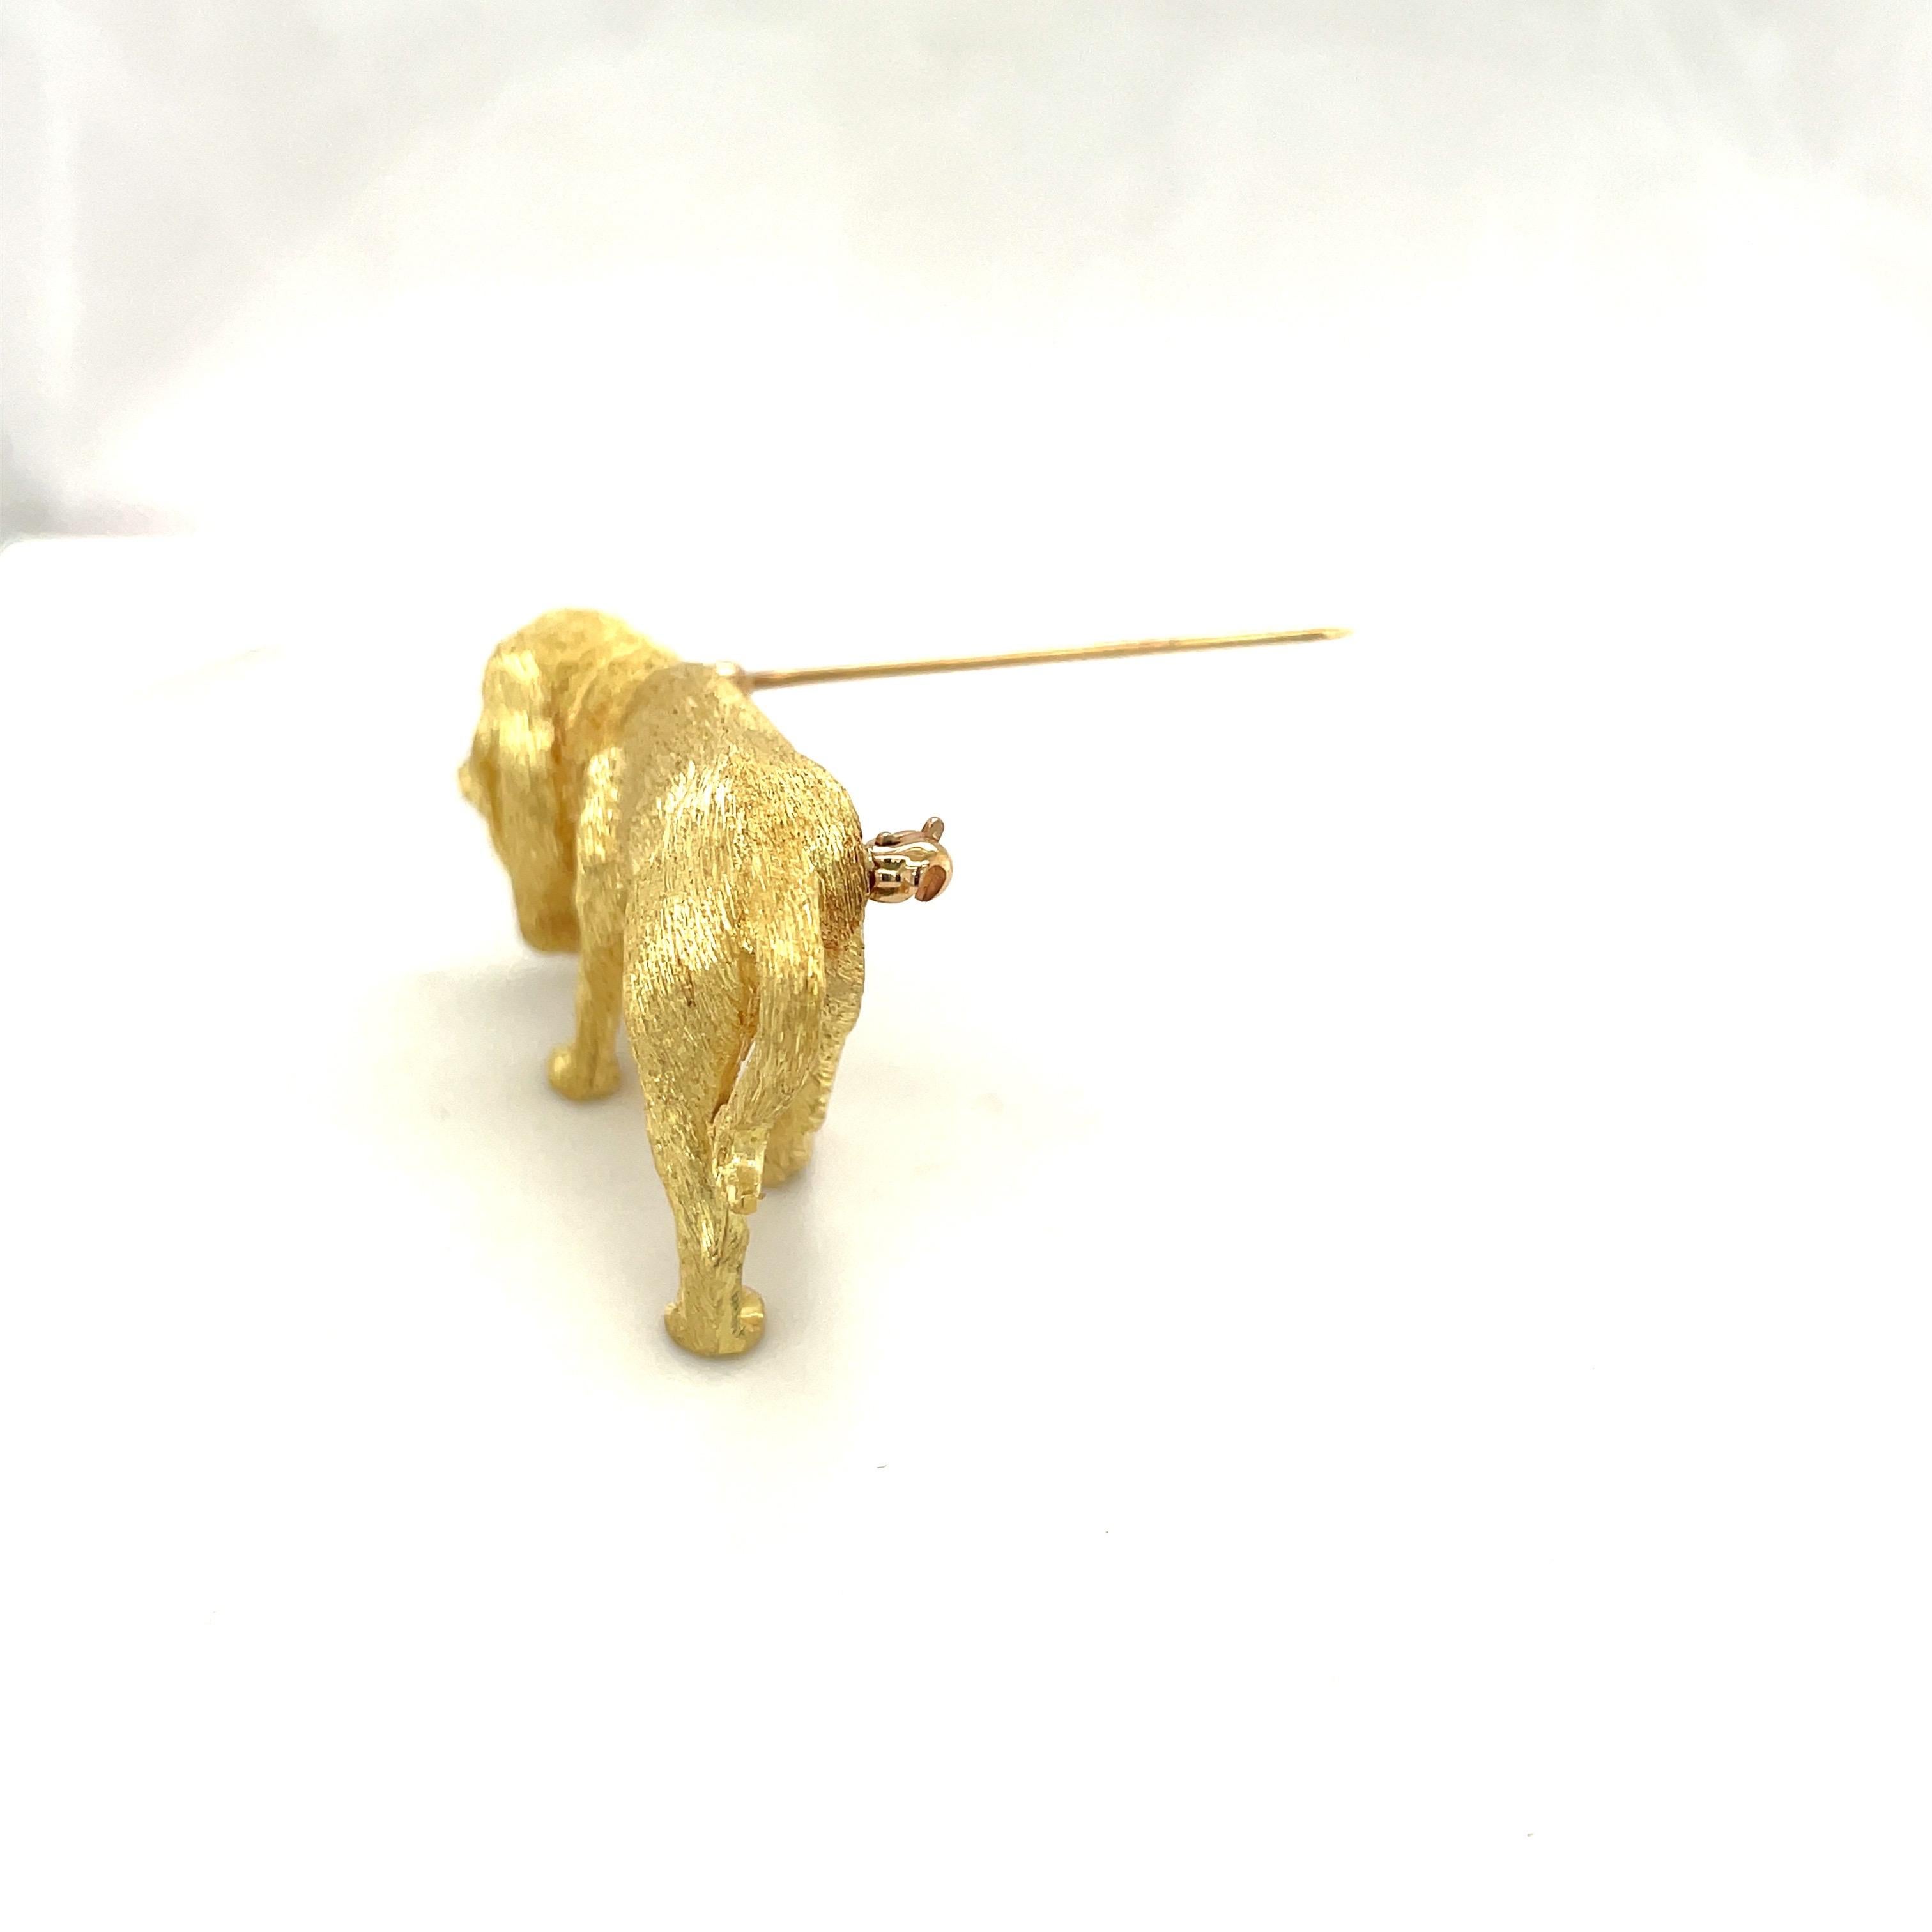 Contemporary George Lederman 18KT Yellow Gold Bloodhound Brooch